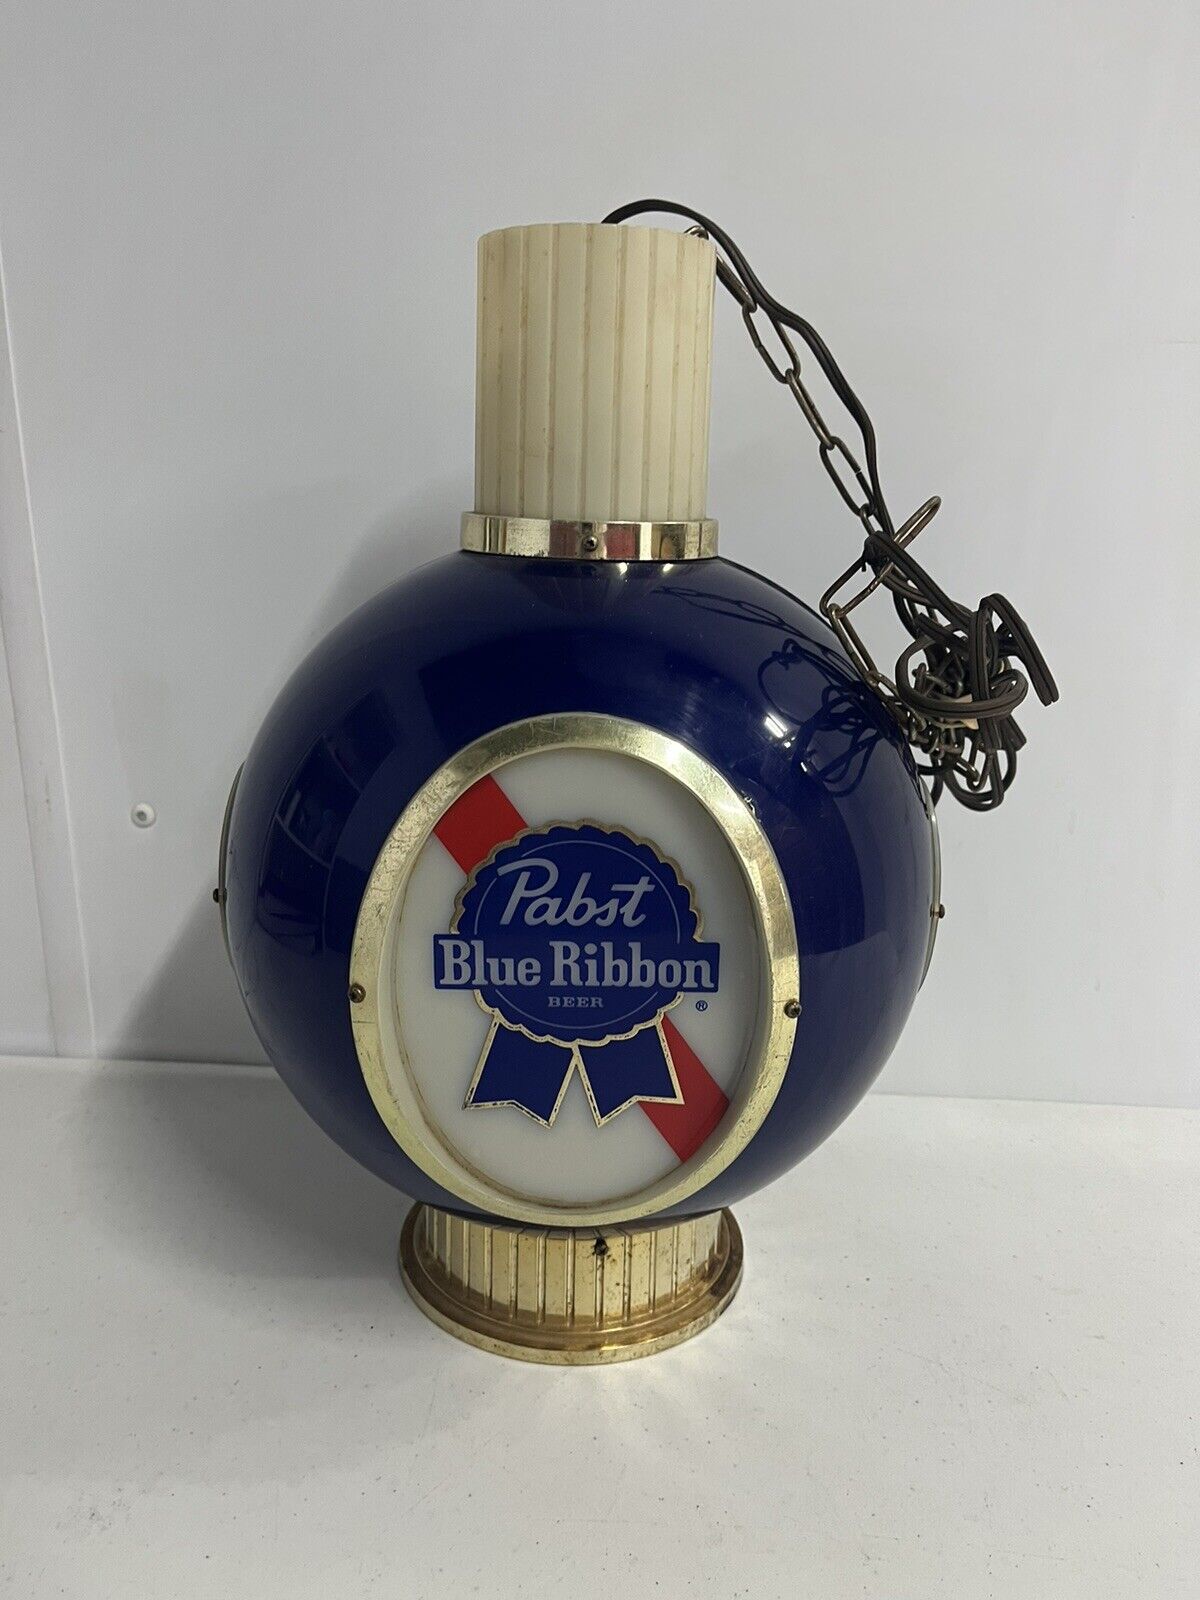 VINTAGE 1960s PBR PABST BLUE RIBBON BEER LIGHTED BAR WALL SCONCE LAMP WORKS